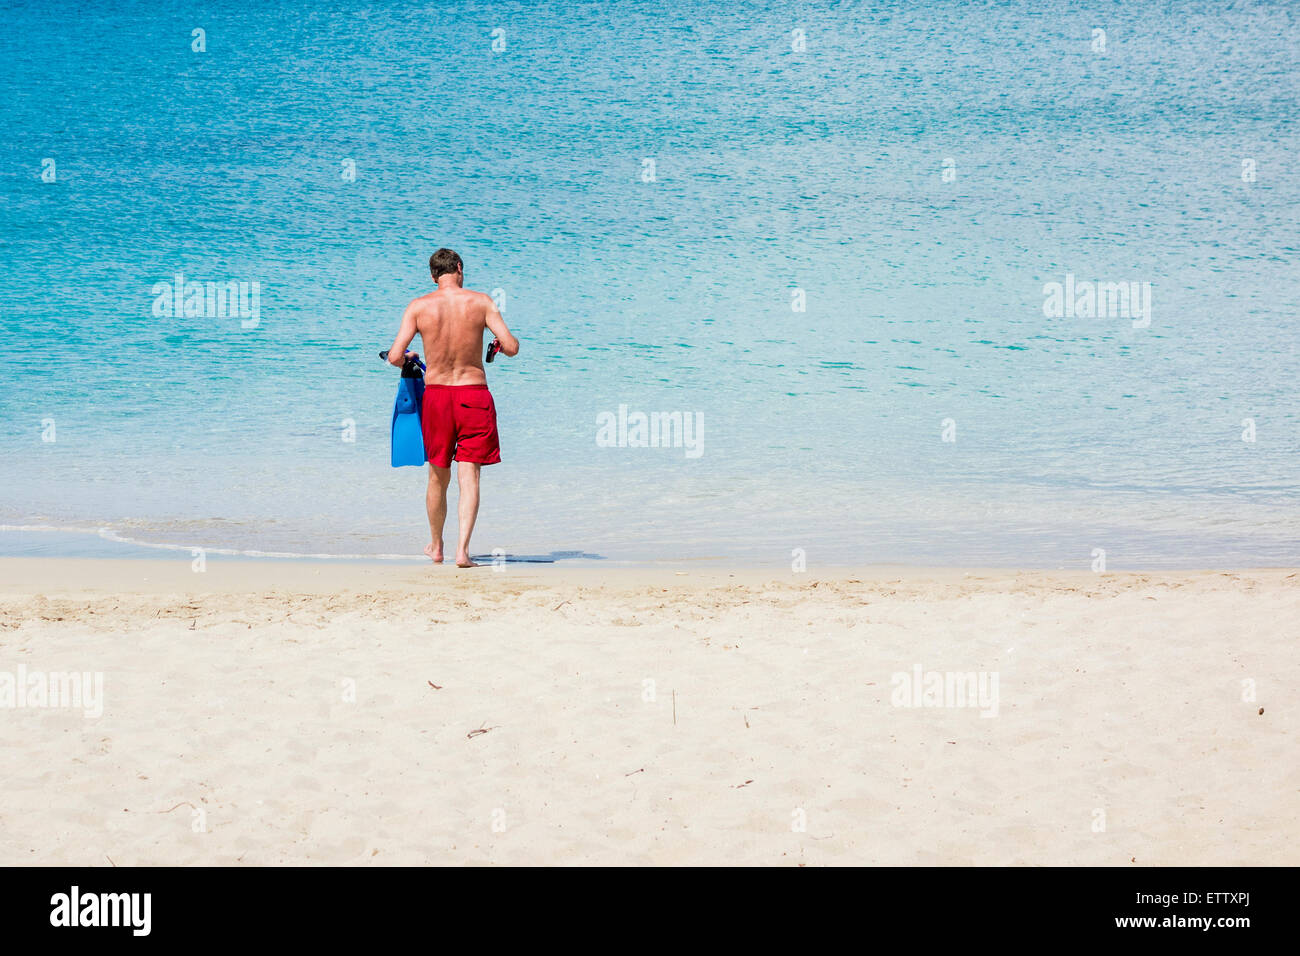 A 35 year old Caucasian man prepares to go snorkling in the Caribbean. St. Croix, US Virgin Islands. Stock Photo